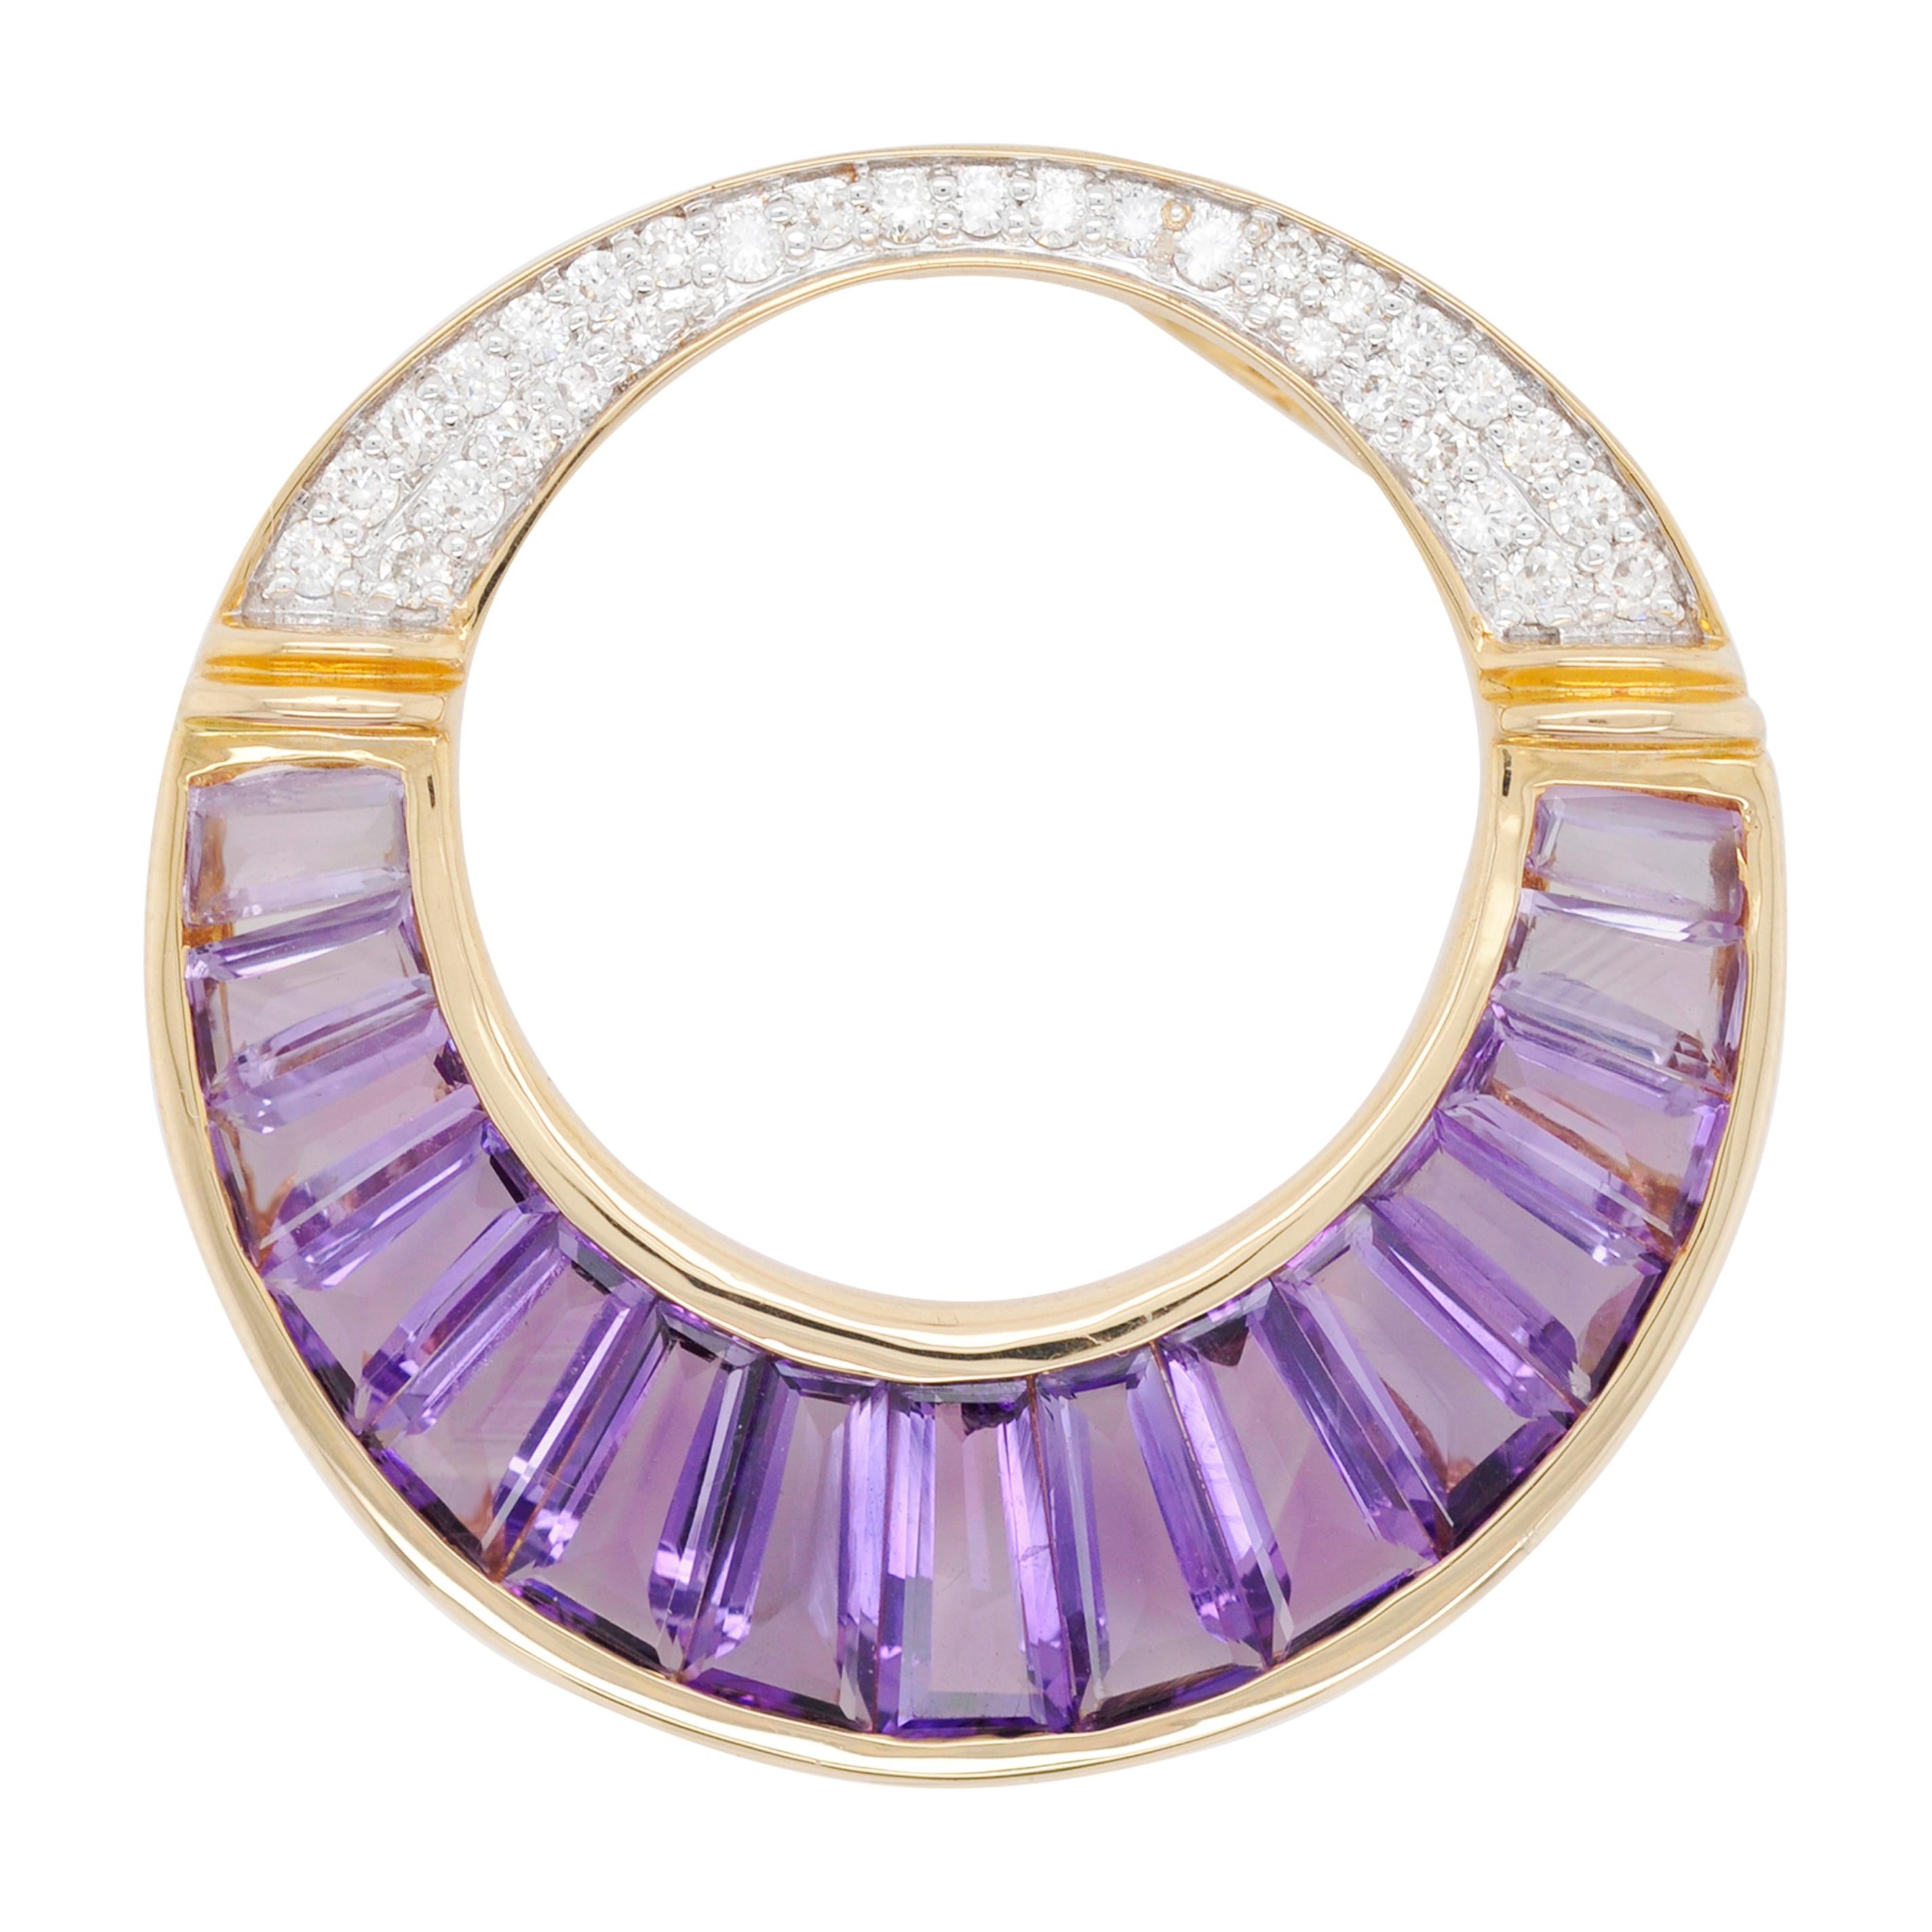 18 karat gold amethyst taper baguette diamond pendant necklace earrings set.

This 18 karat gold calibre cut taper baguette amethyst set makes you experience exotic. The diamond circular pendant is inspired by the necklace worn by cleopatra in the